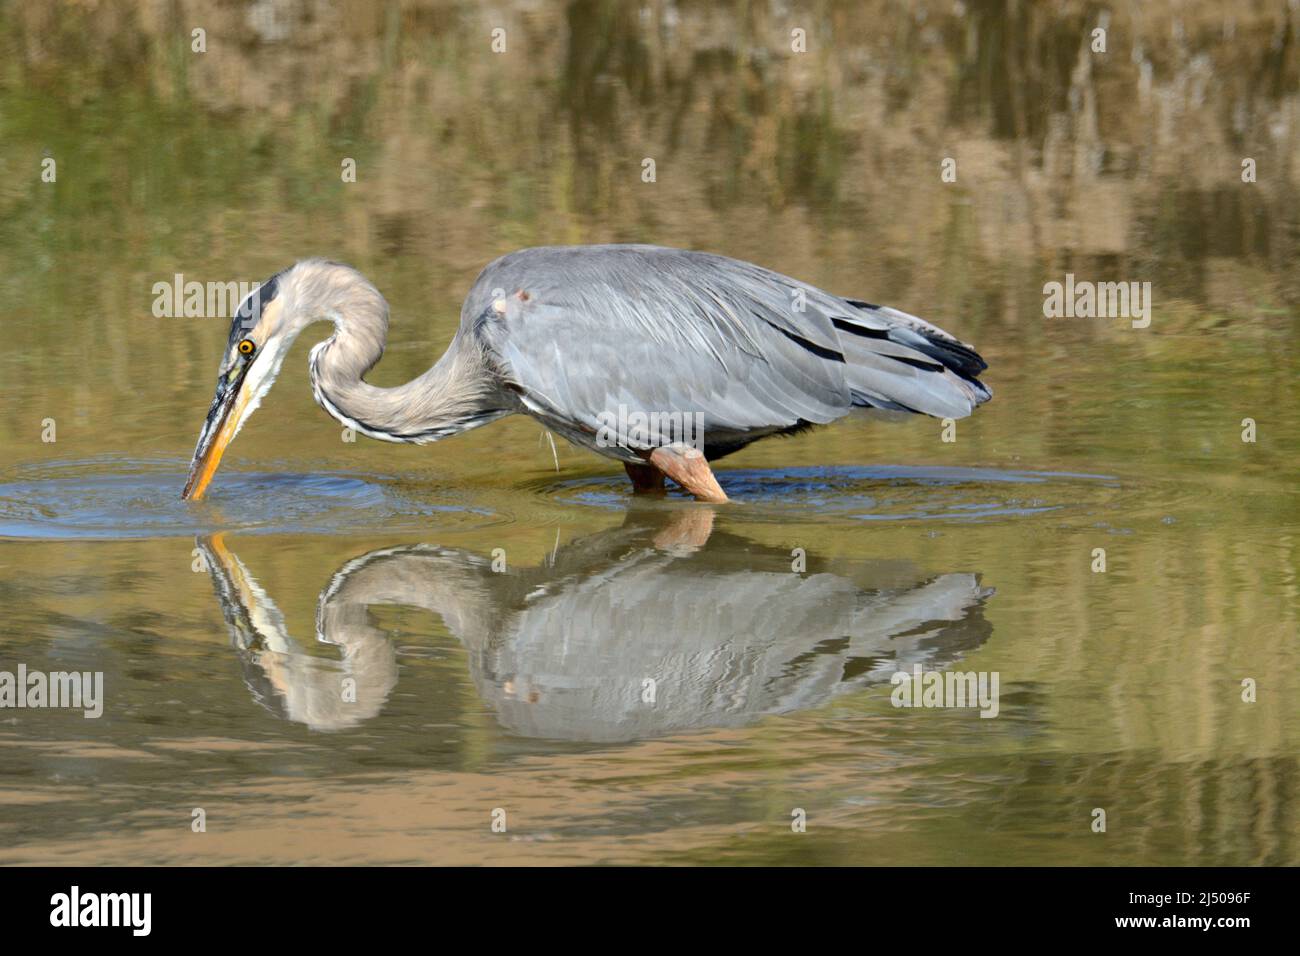 Great Blue Heron wading and fishing in shallow end of lake Stock Photo